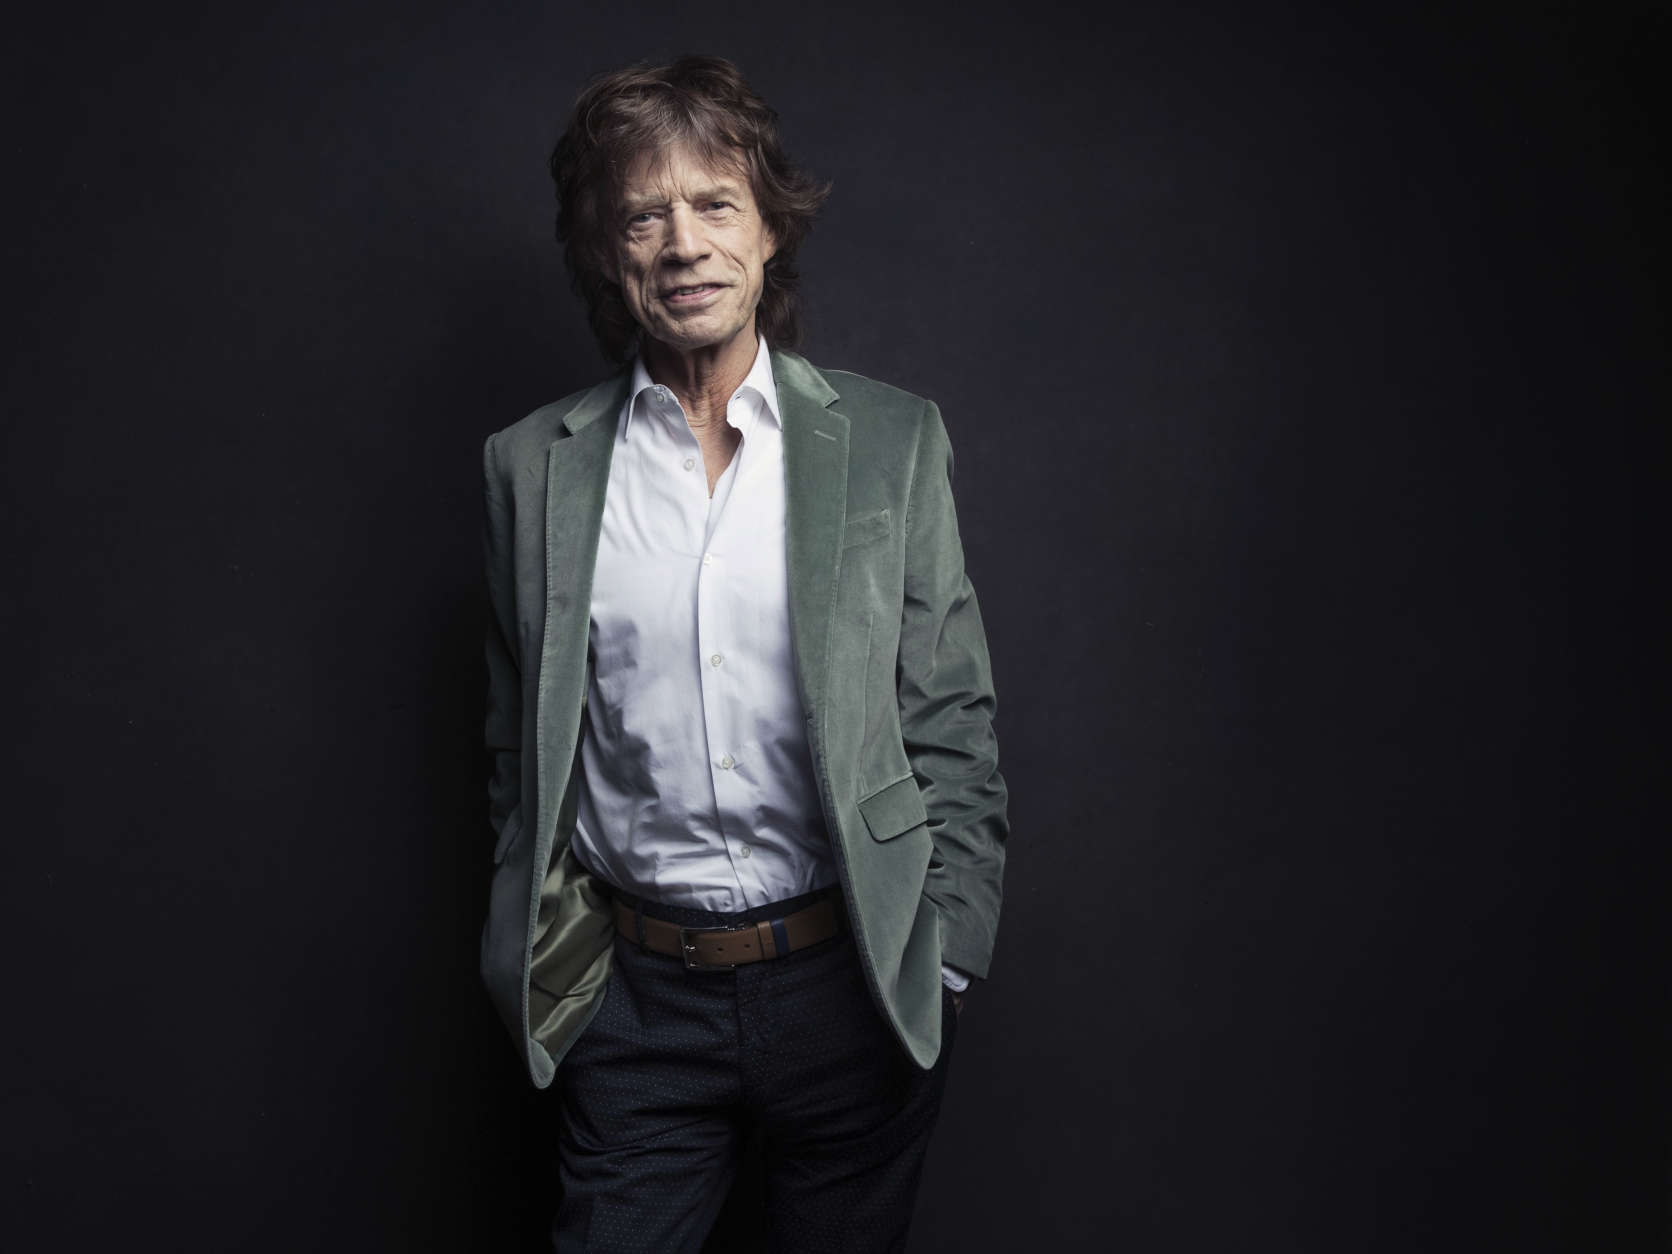 Mick Jagger of the Rolling Stones poses for a portrait on Monday, Nov. 14, 2016, in New York. Jagger was coming up with ideas for an exhibition highlighting The Rolling Stones' five-decade long career, he wanted to re-create the mood of the band in their early years. So, he had a team re-make the first - and messy - London apartment he shared with his band mates in 1962, complete with dirty dishes, beer bottles and blues records placed throughout the flat. (Photo by Victoria Will/Invision/AP)